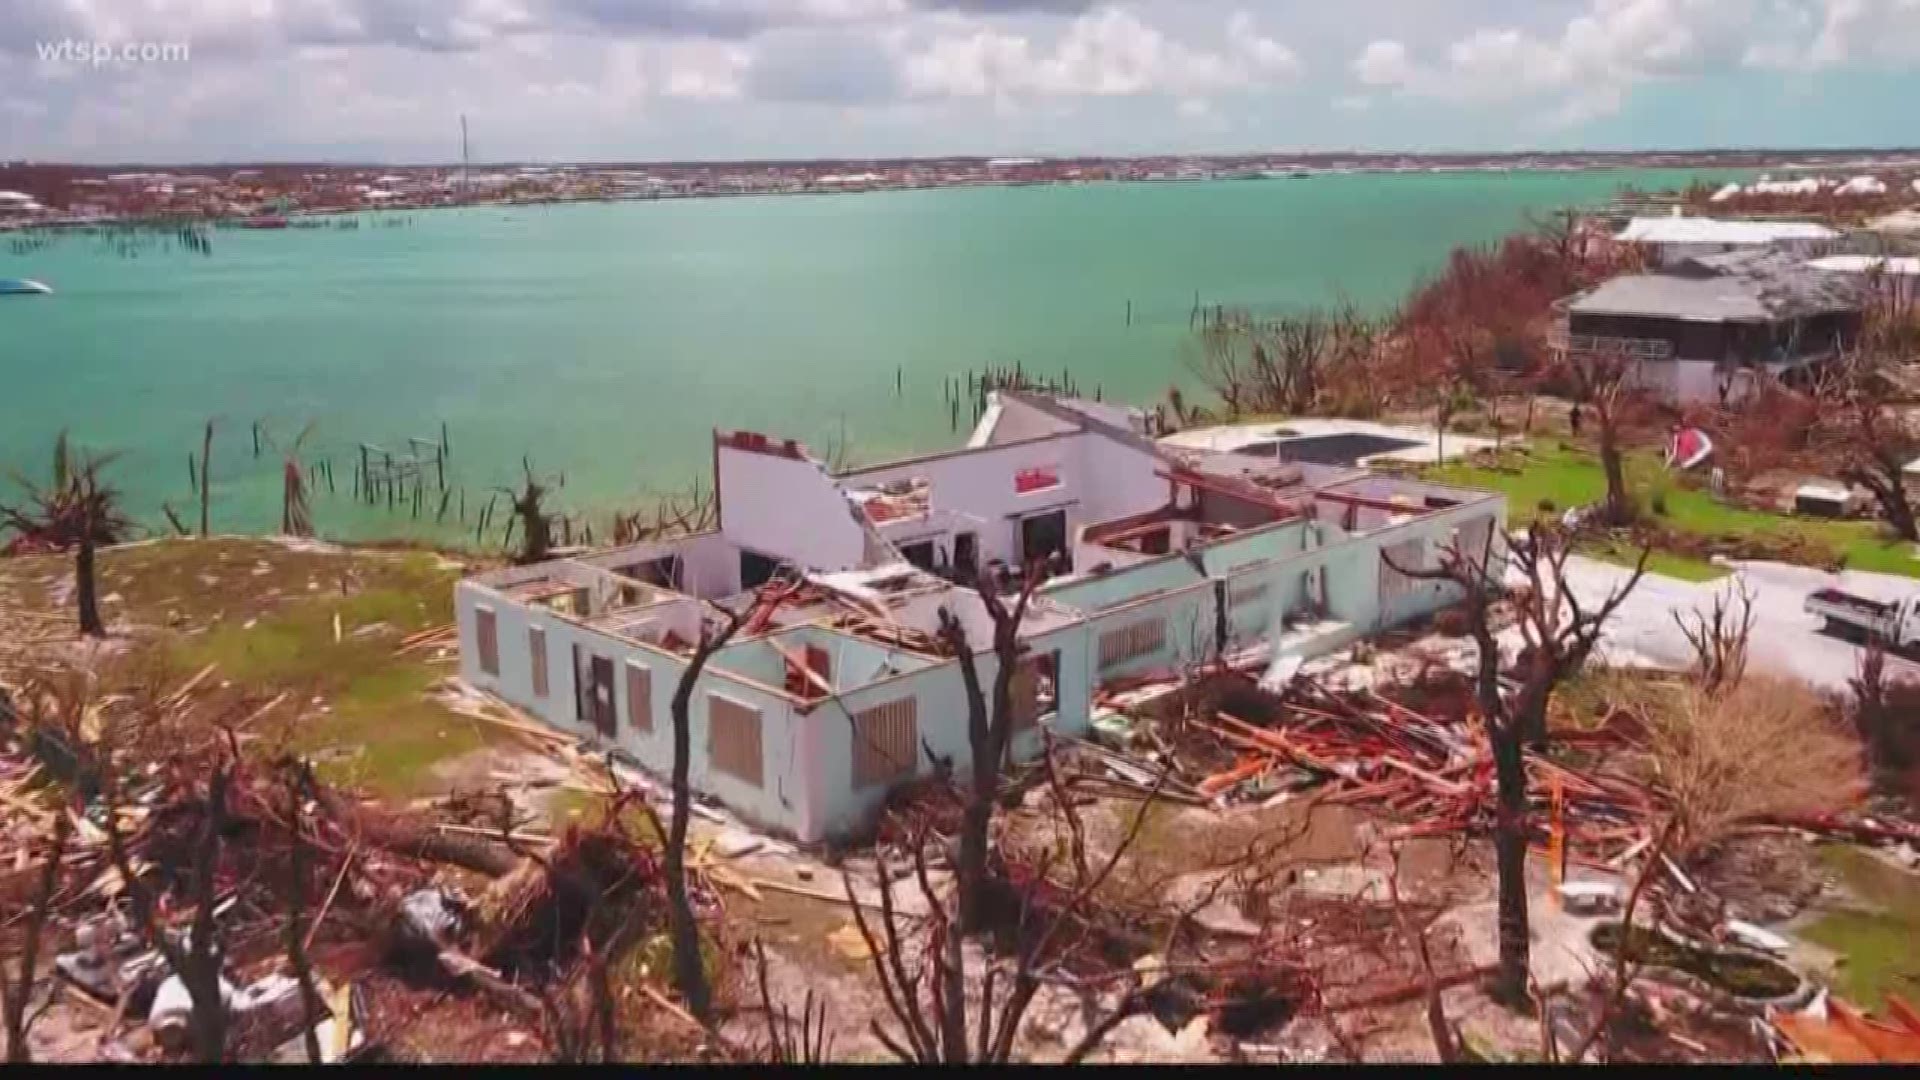 70,000 people are without homes in the Bahamas. Where do they go now?